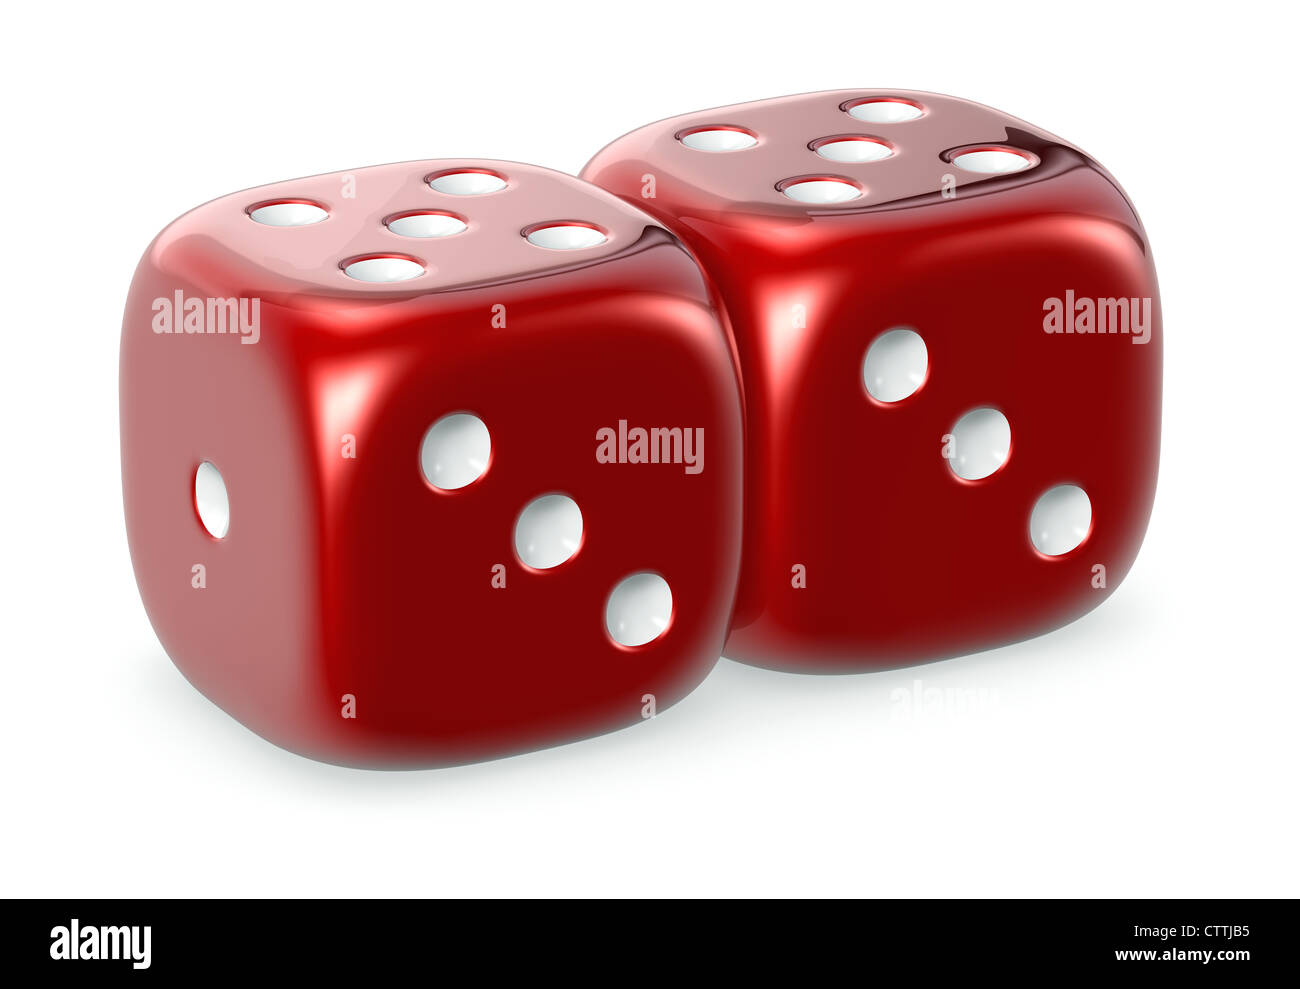 Pair of a red dice Stock Photo